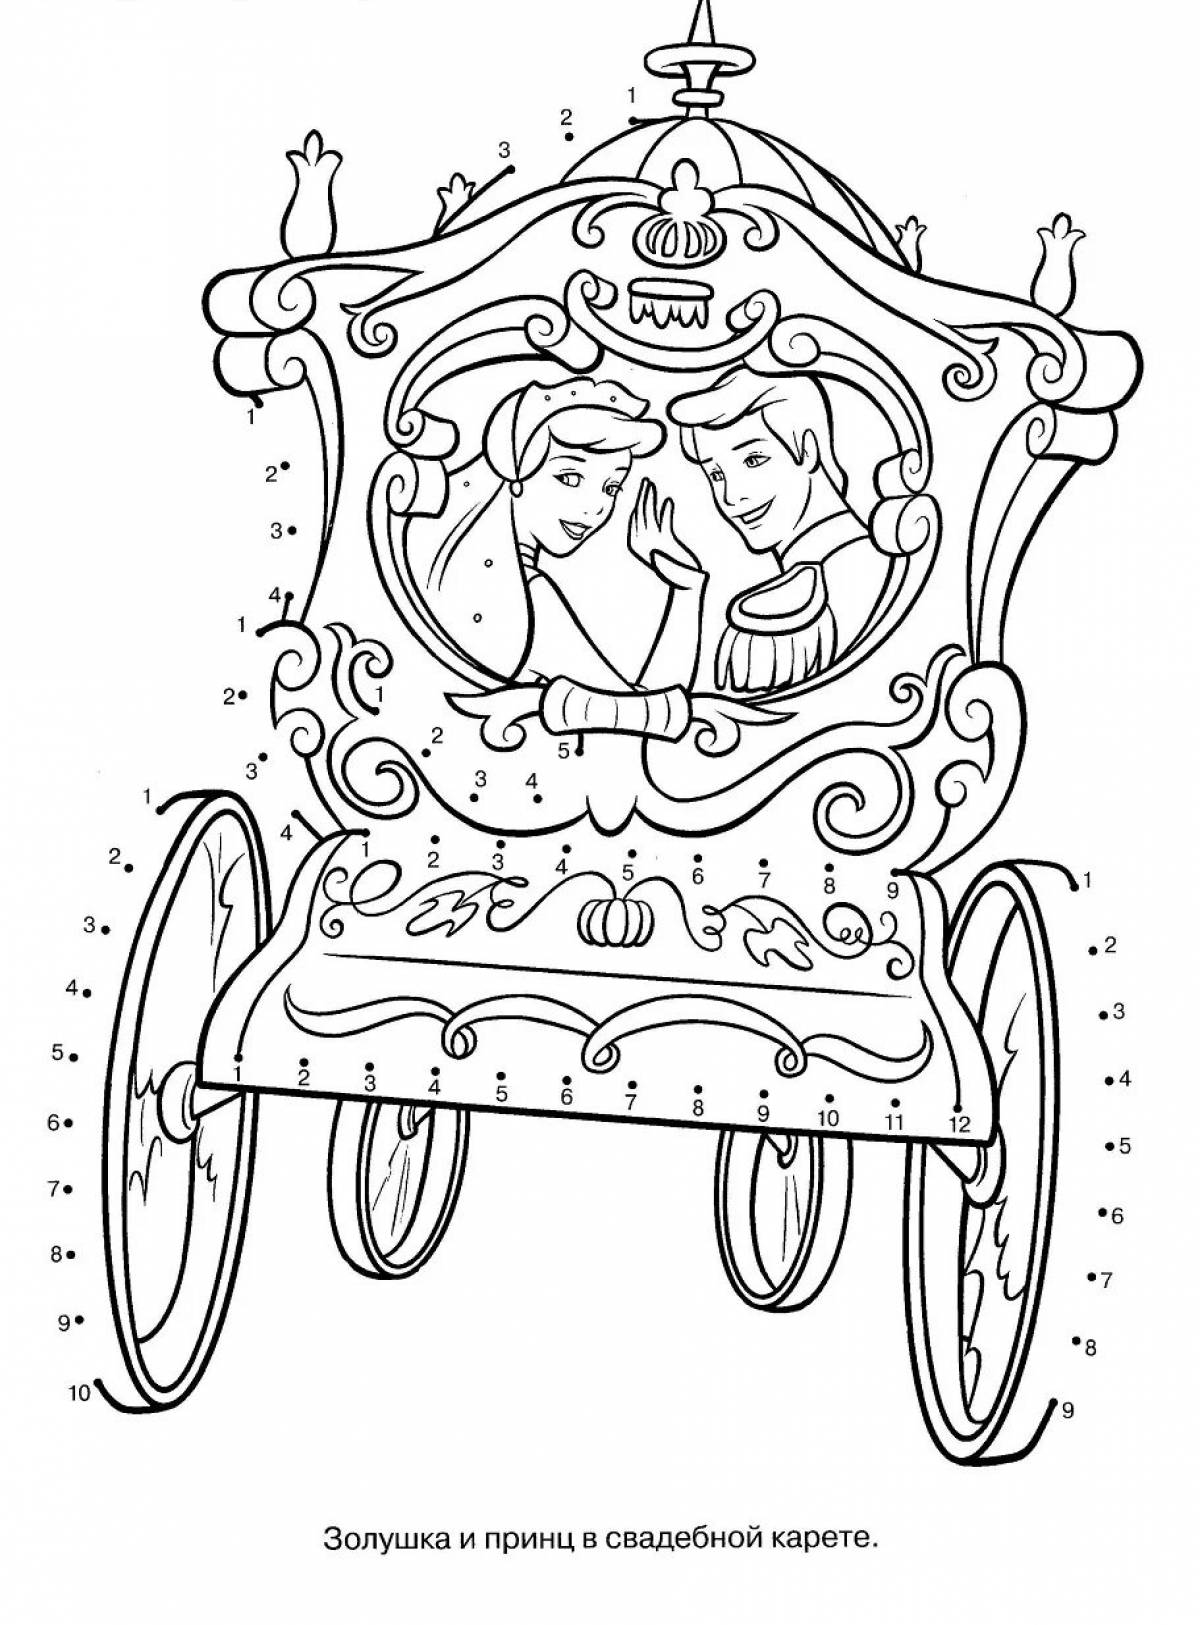 Princess in carriage #3